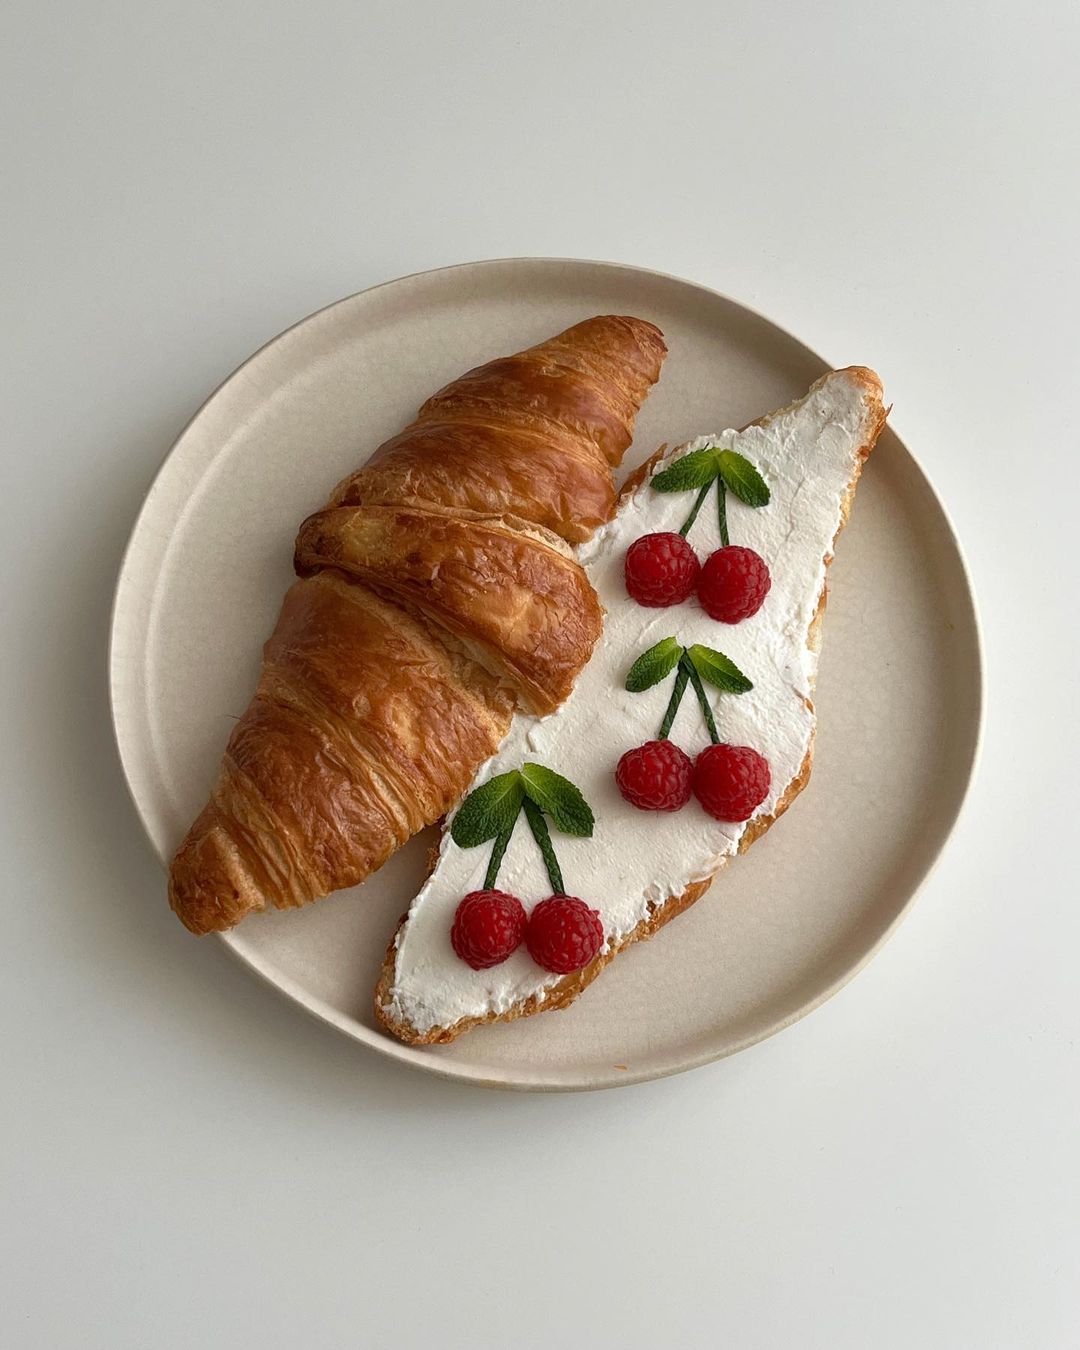 whipped cheese and berries in shape of cherries on croissant